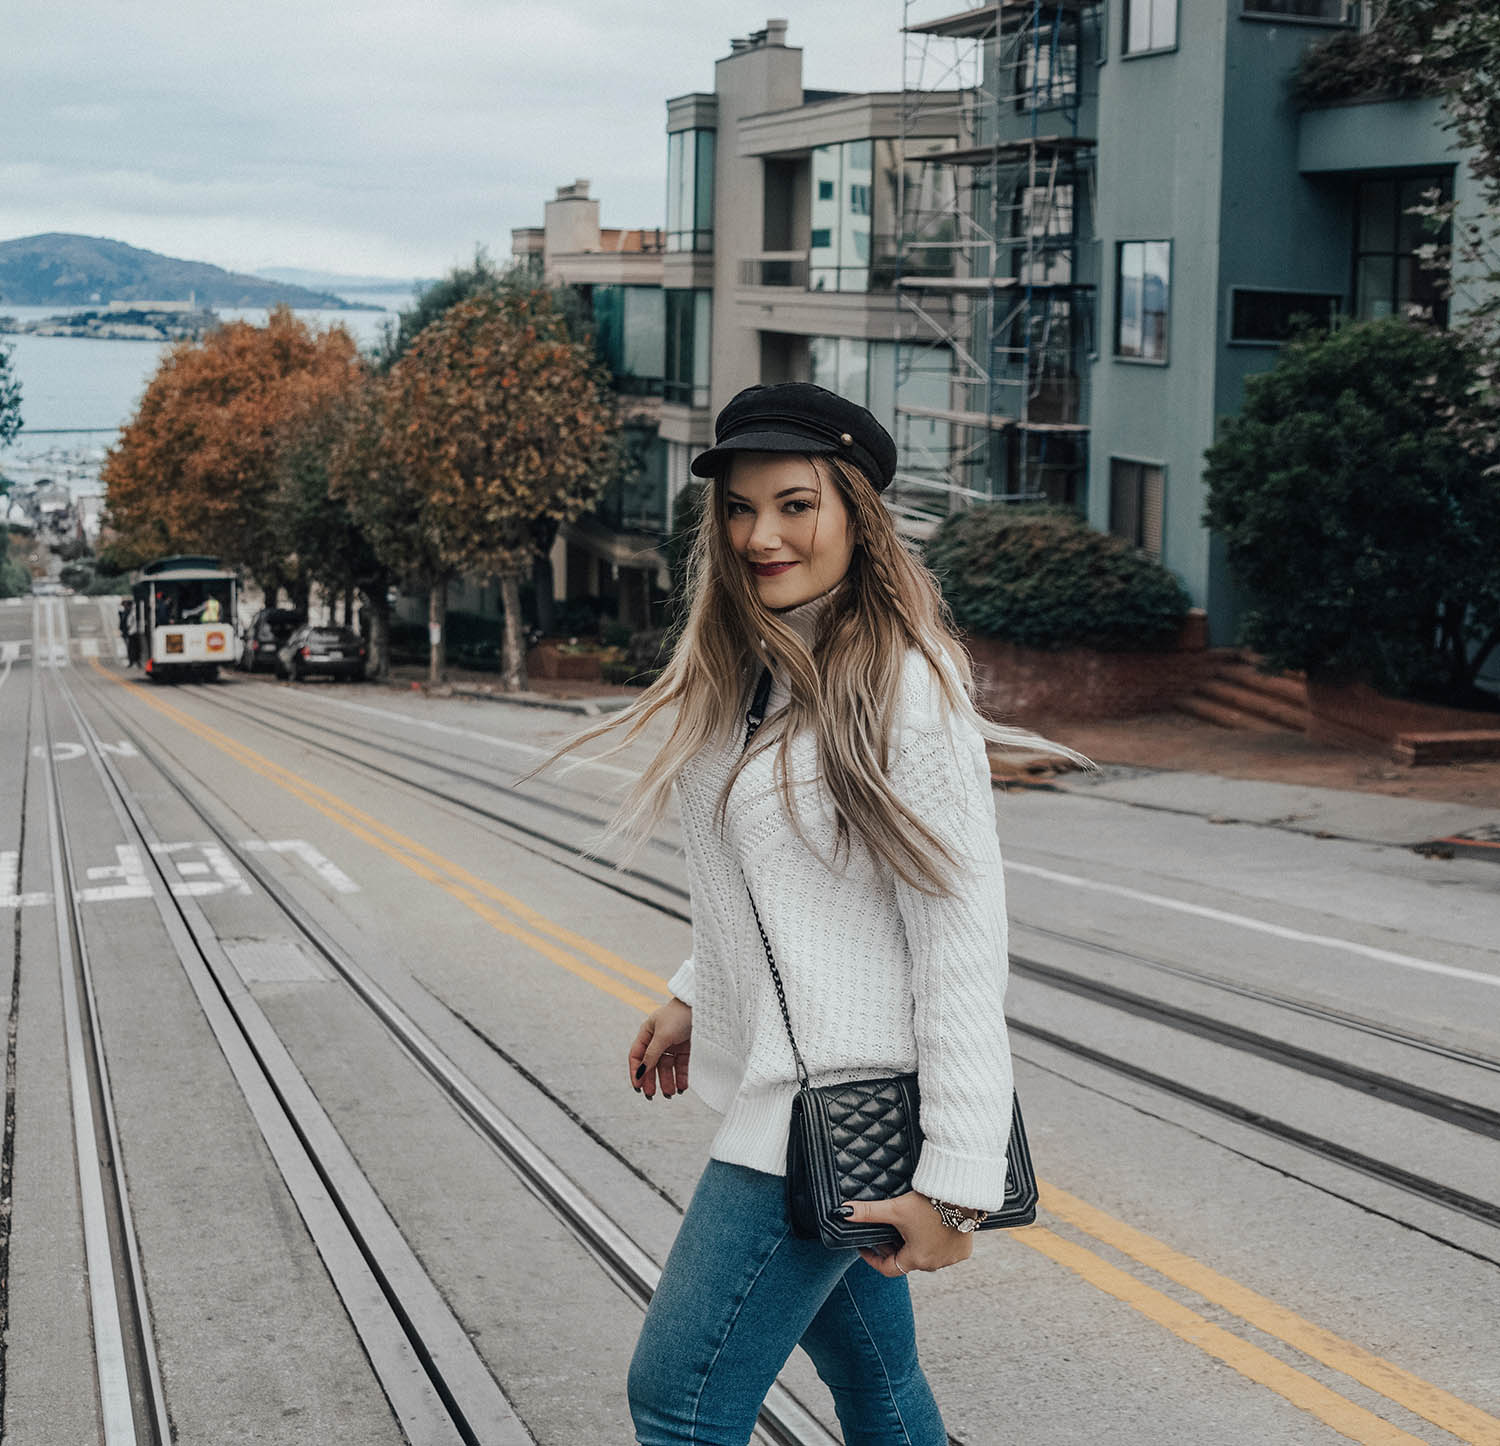 White cozy knit sweater & Jeans Outfit - San Francisco Lookbook